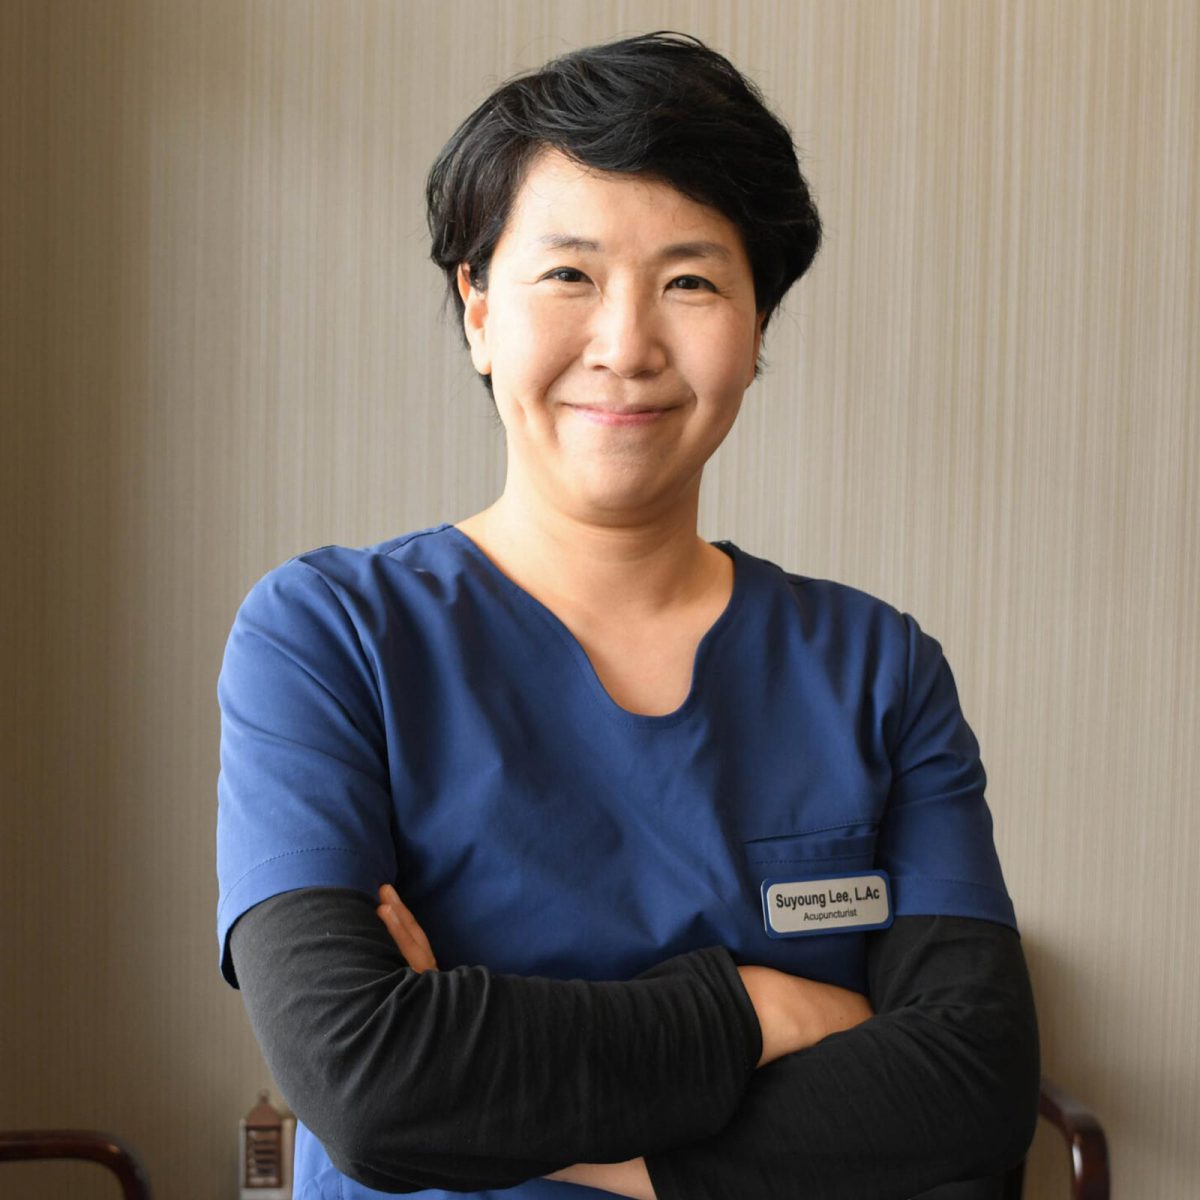 Suyoung Lee SportsMed Physical Therapist